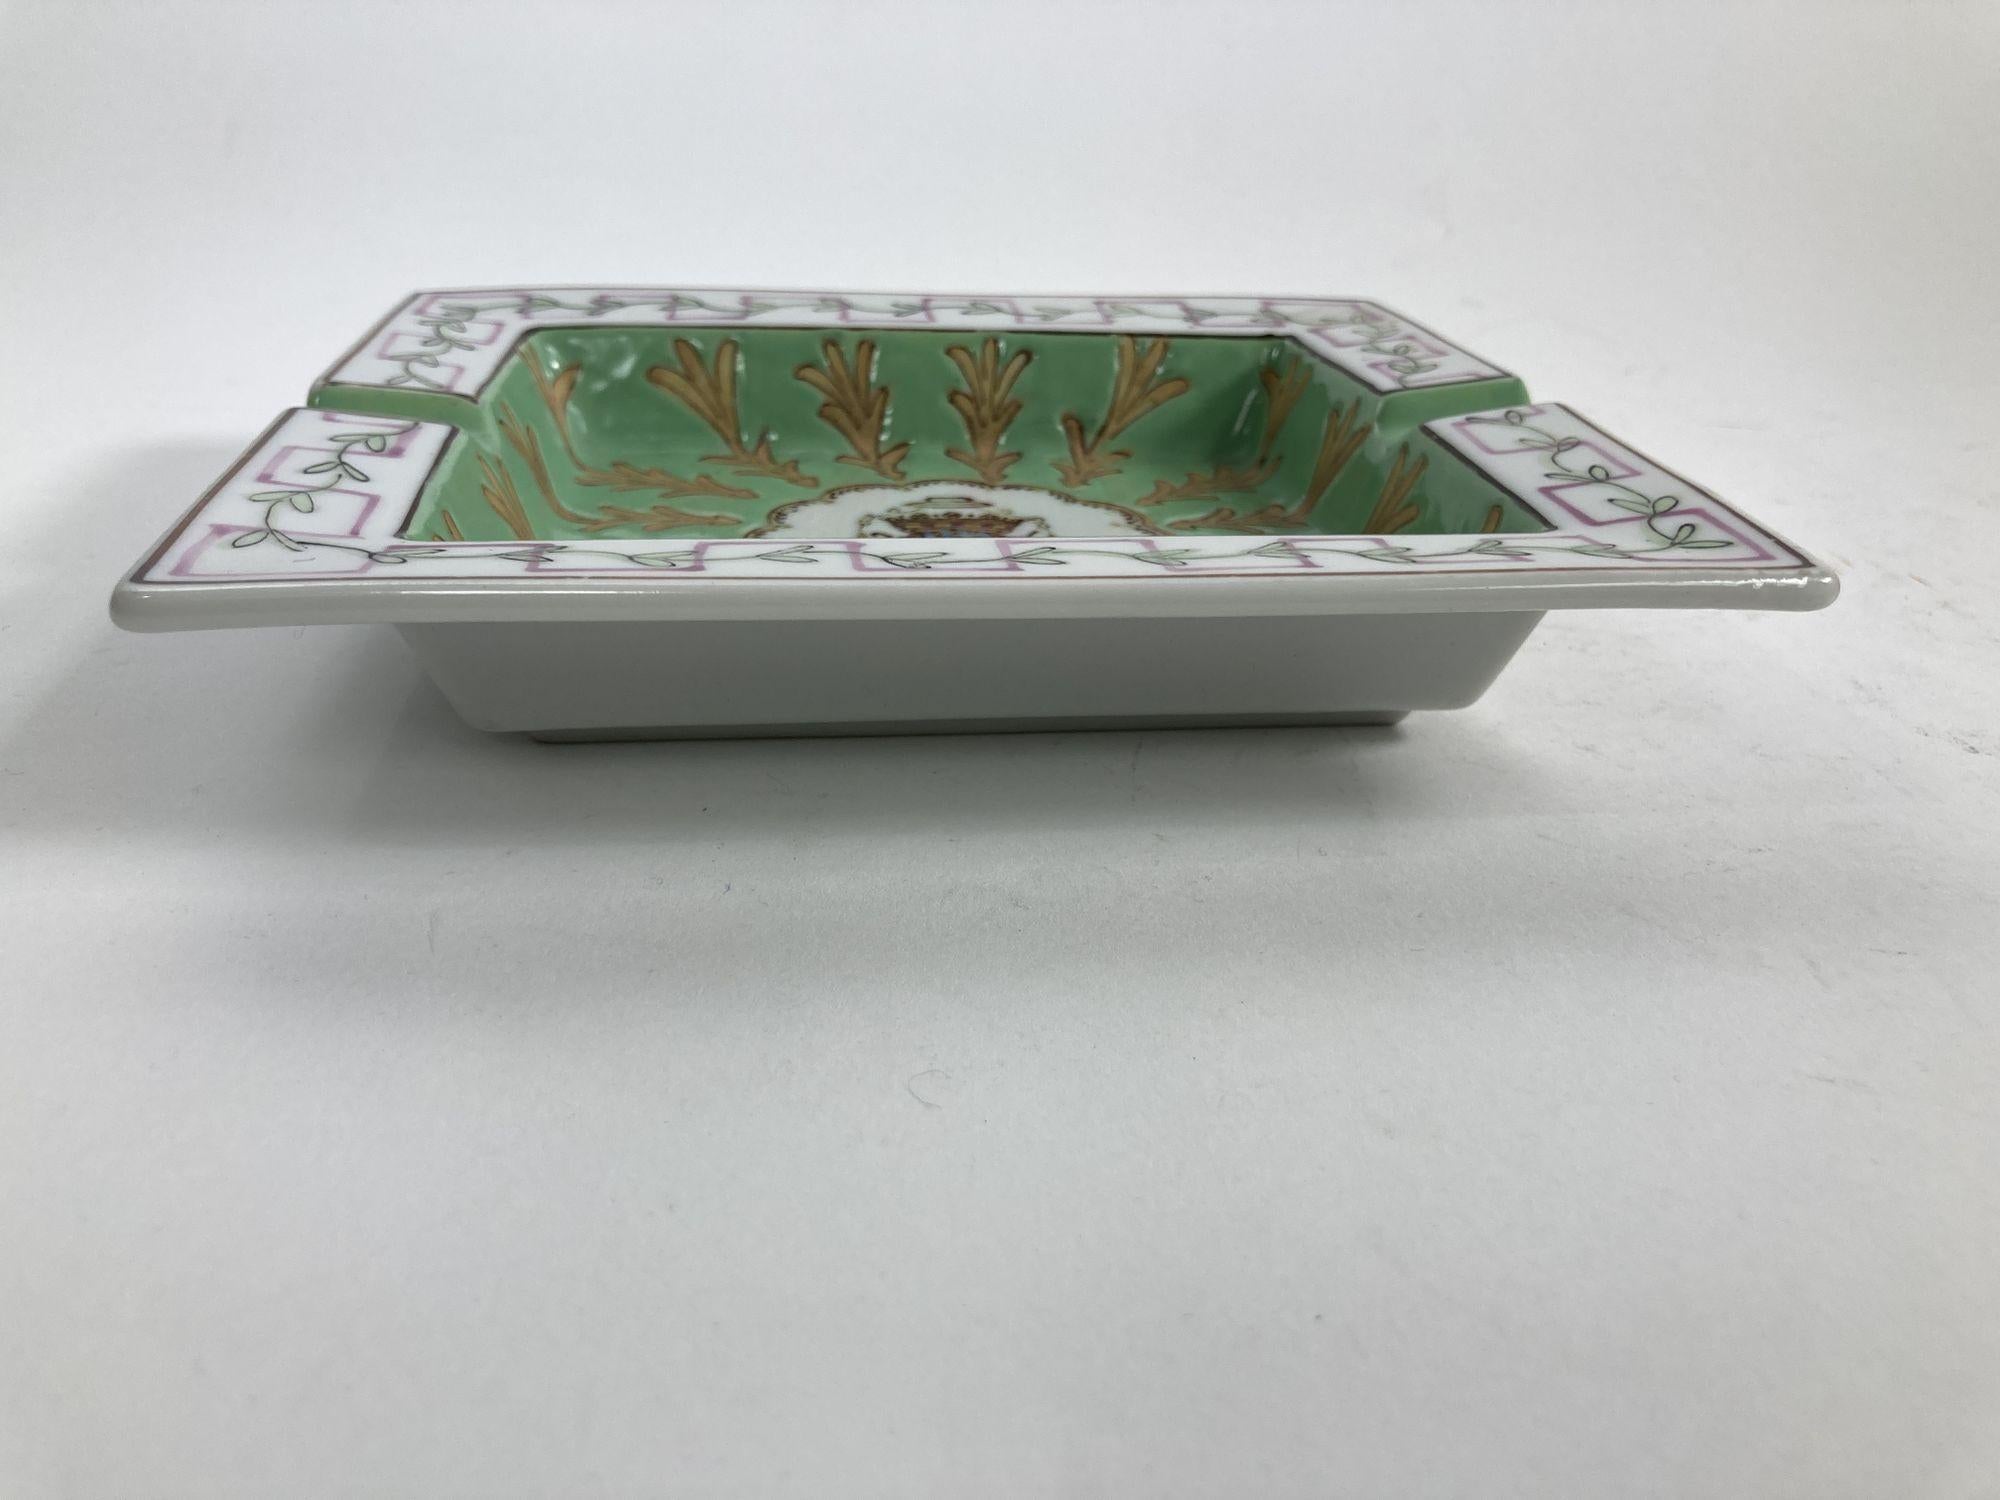 Modern Vintage Porcelain Ashtray White and Green with Coat of Arms